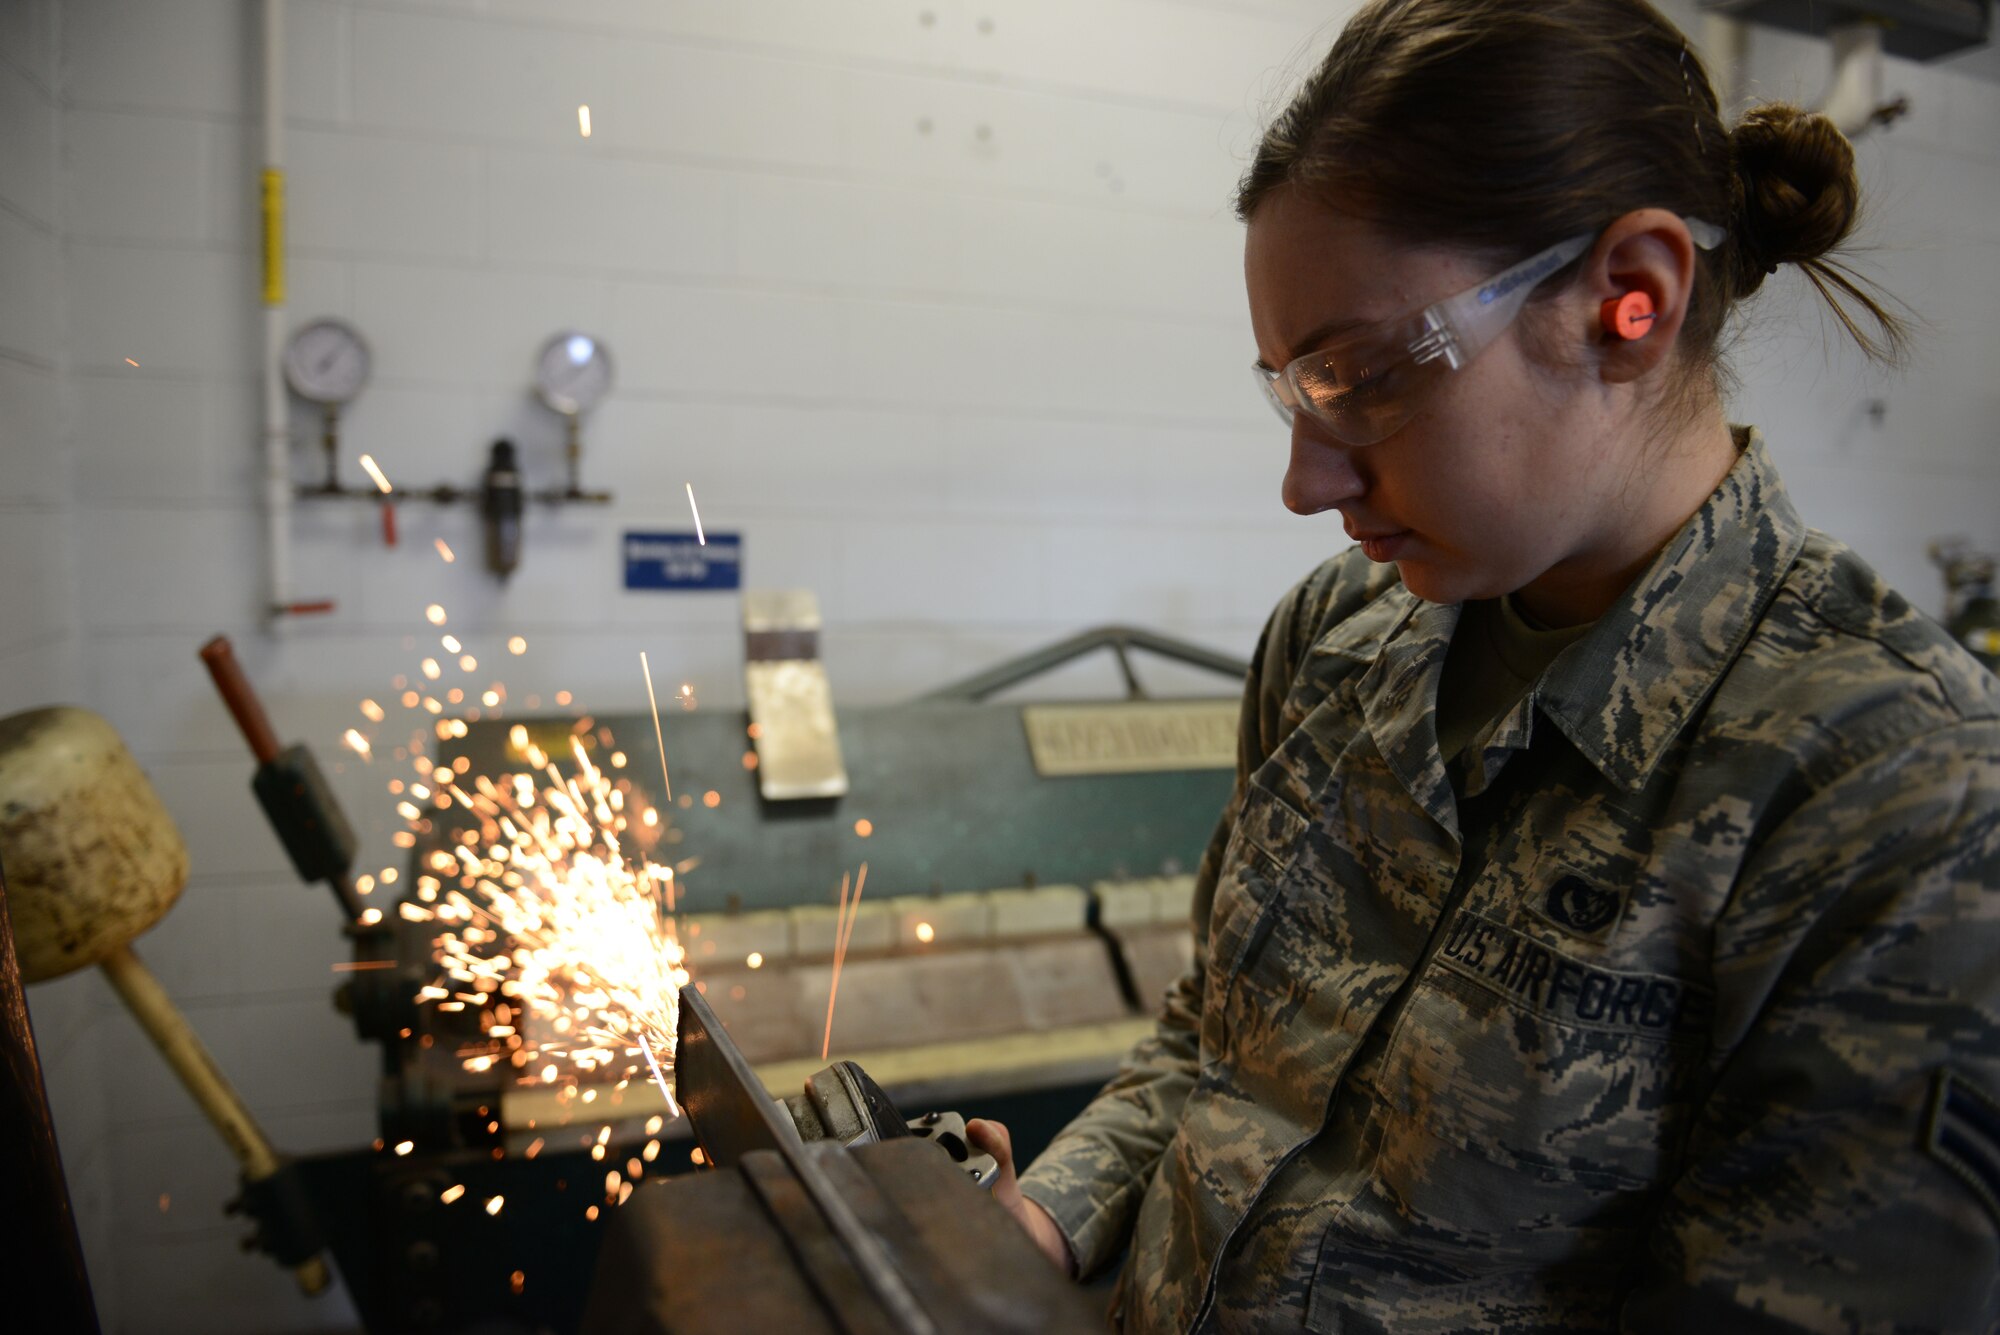 Airman 1st Class Katie Puza, a structural craftsmen assigned to the 103rd Airlift Wing, cleans a piece of metal with a grinder on Barnes Air National Guard Base, Westfield Mass., April 3, 2016. The Flying Yankees had the opportunity to use the facilities at Barnes to undergo a refresher course in welding. (U.S. Air National Guard photo by Senior Airman Emmanuel Santiago)